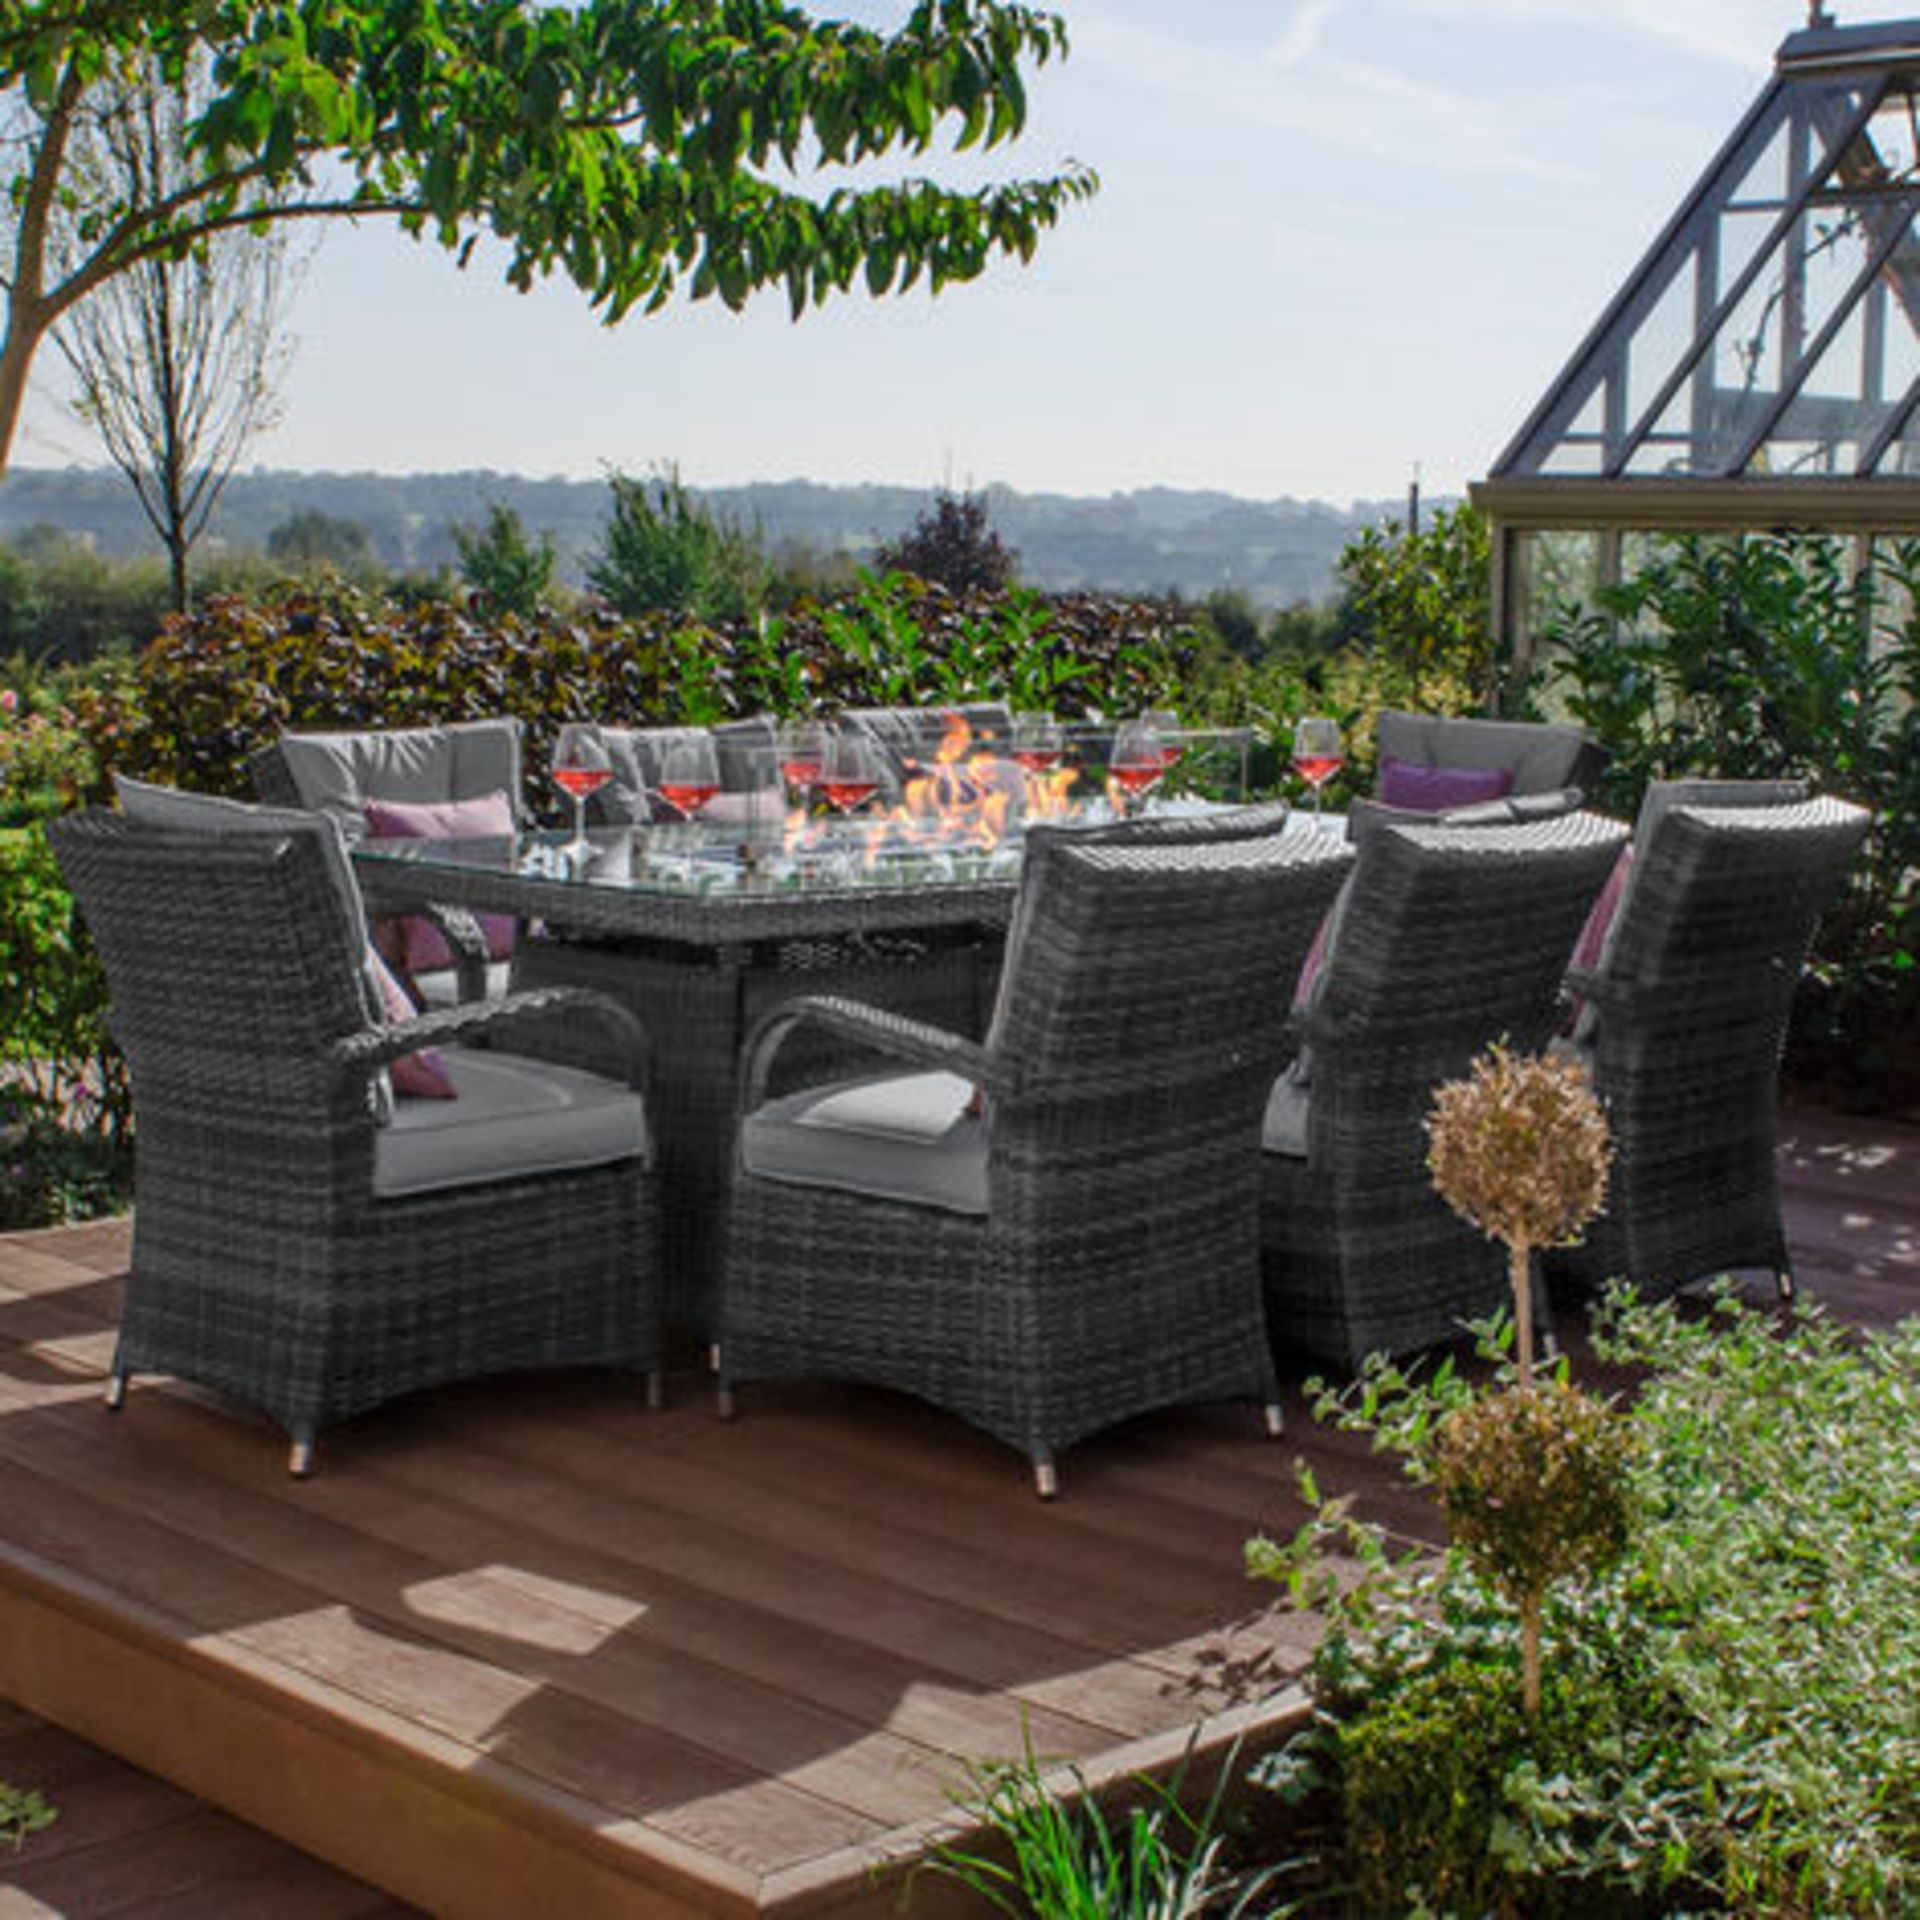 V Brand New Superb 8 Seater Rattan Dining Set With 2m x 1m Table With Center Gas FirePit - Grey